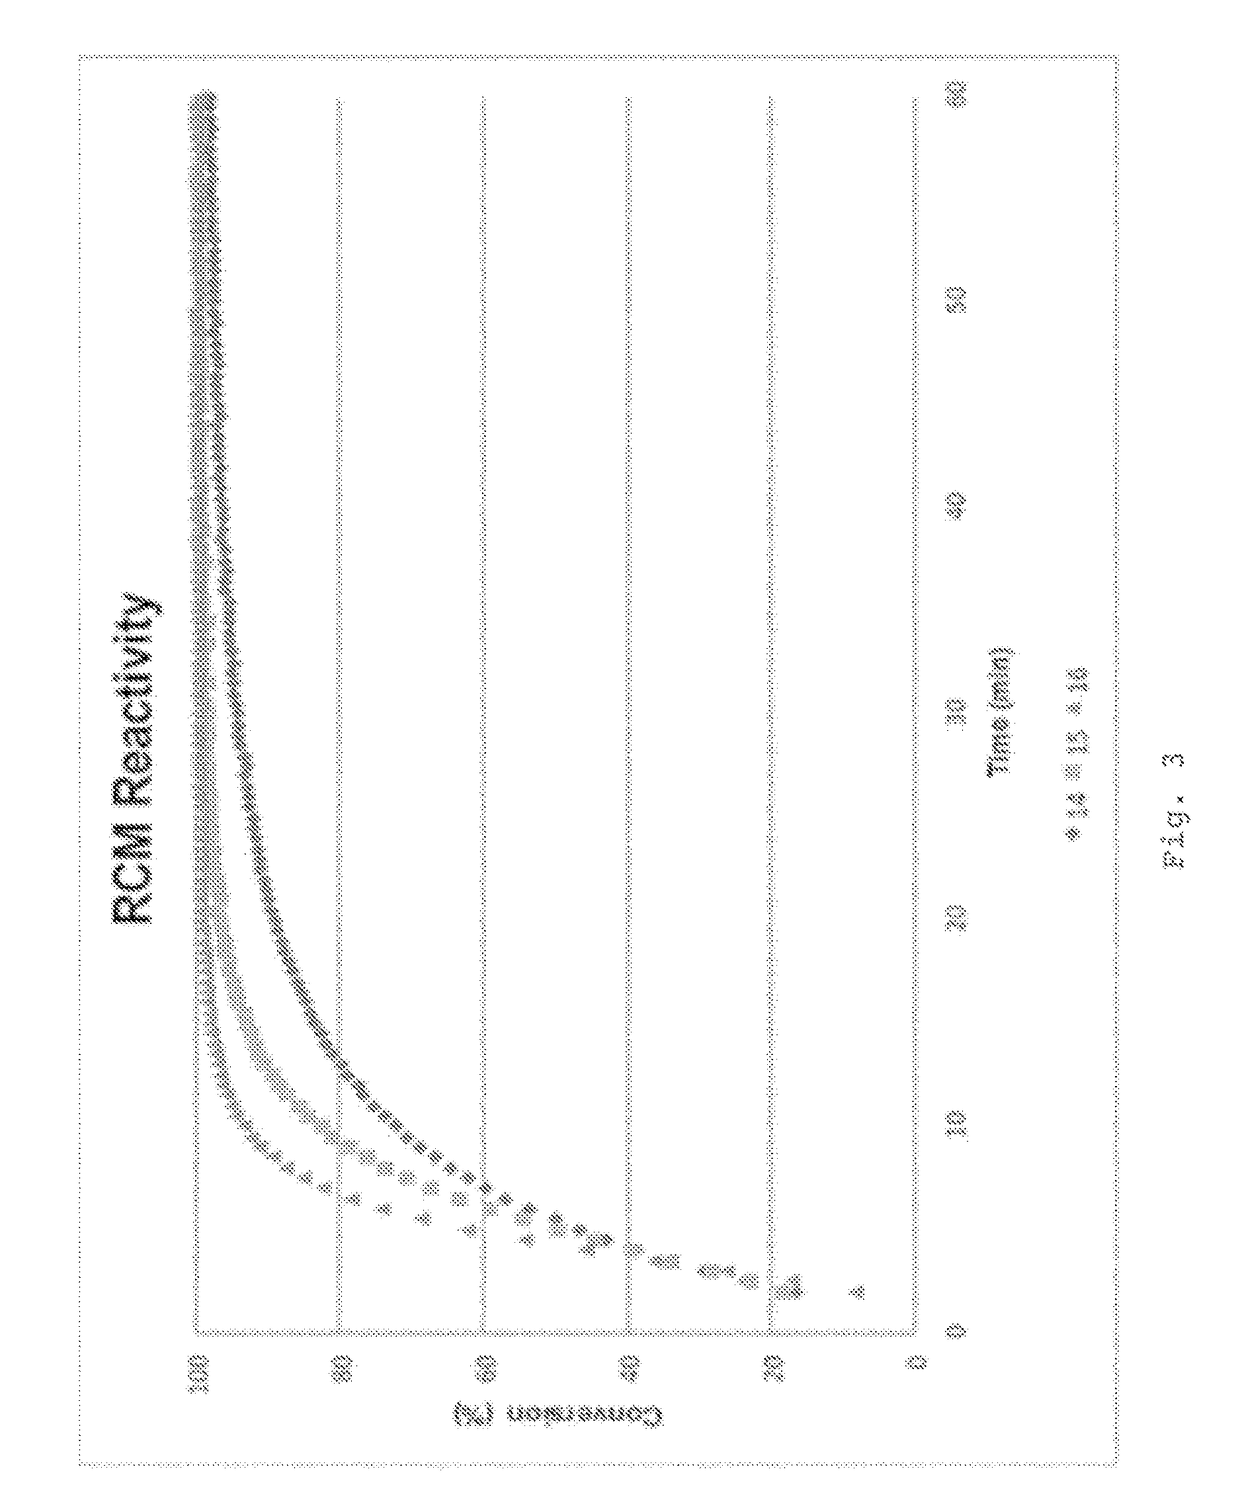 Transition metal complex containing sulfonamide or amide group for olefin metathesis reaction and application thereof